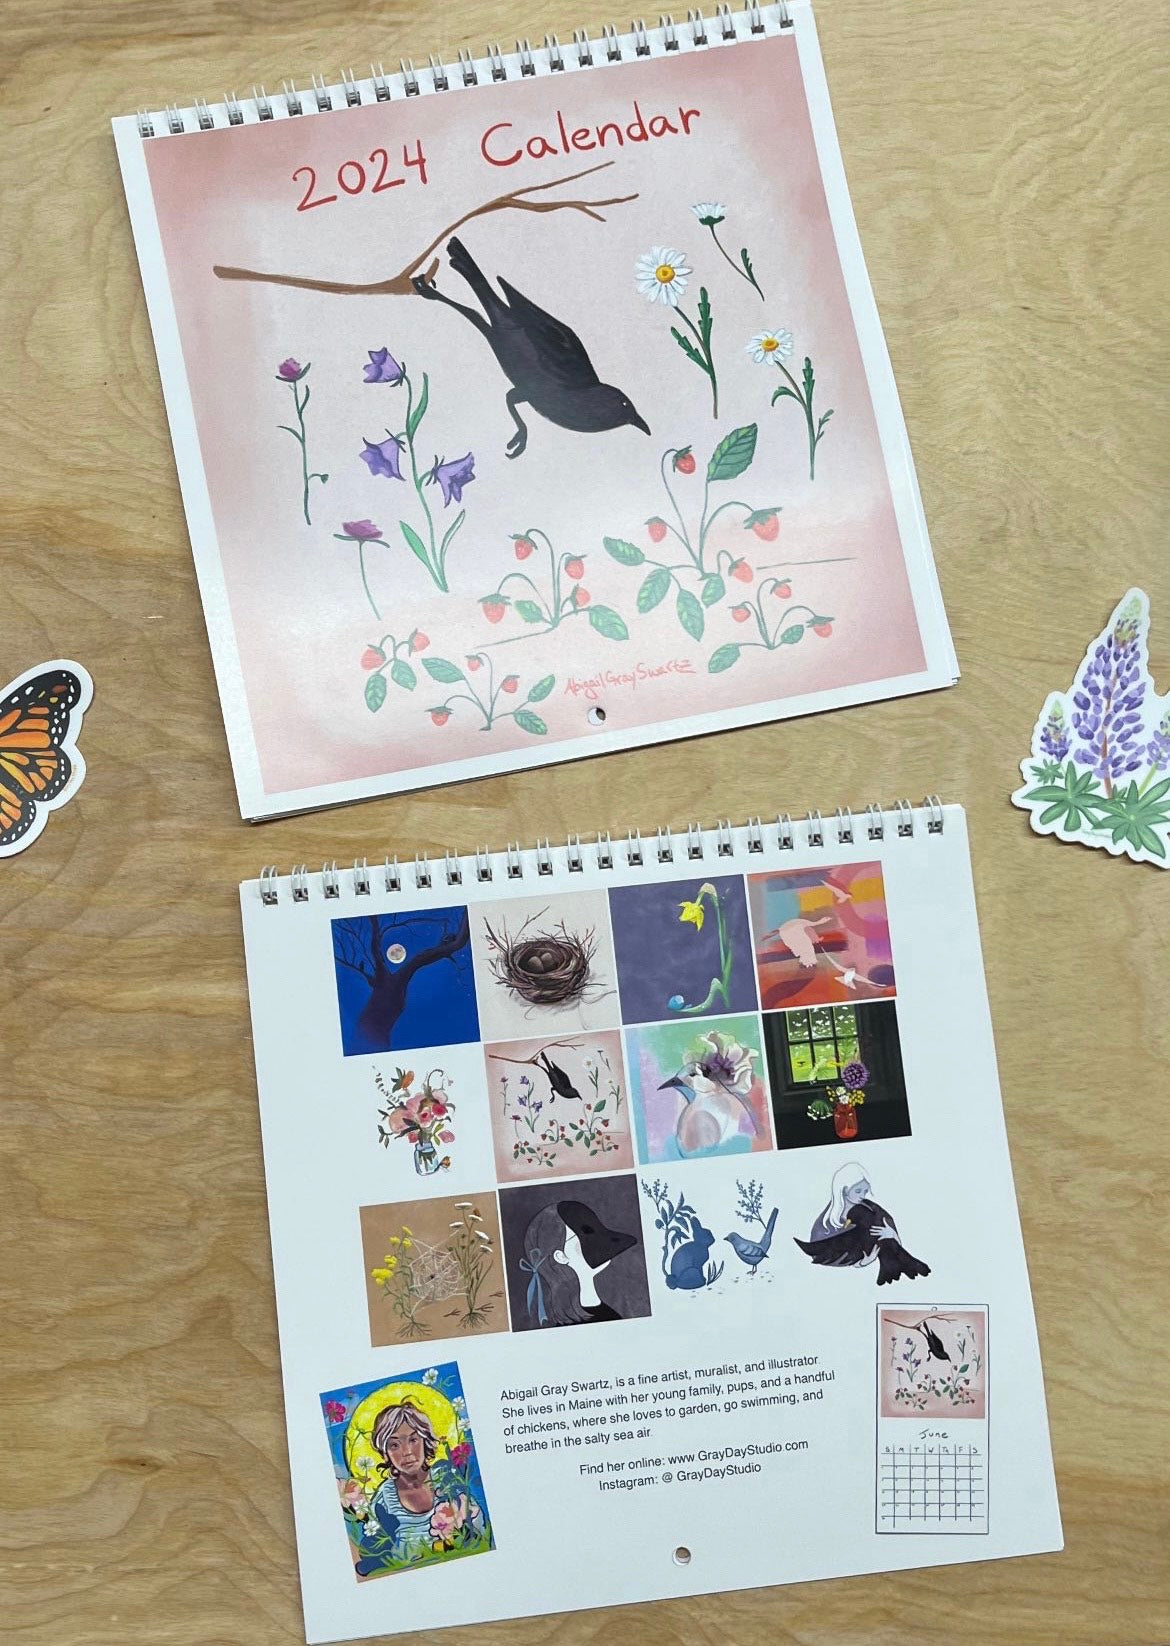 SALE: A Story for the Birds, 2024 Wall calendar  || by Abigail Gray Swartz